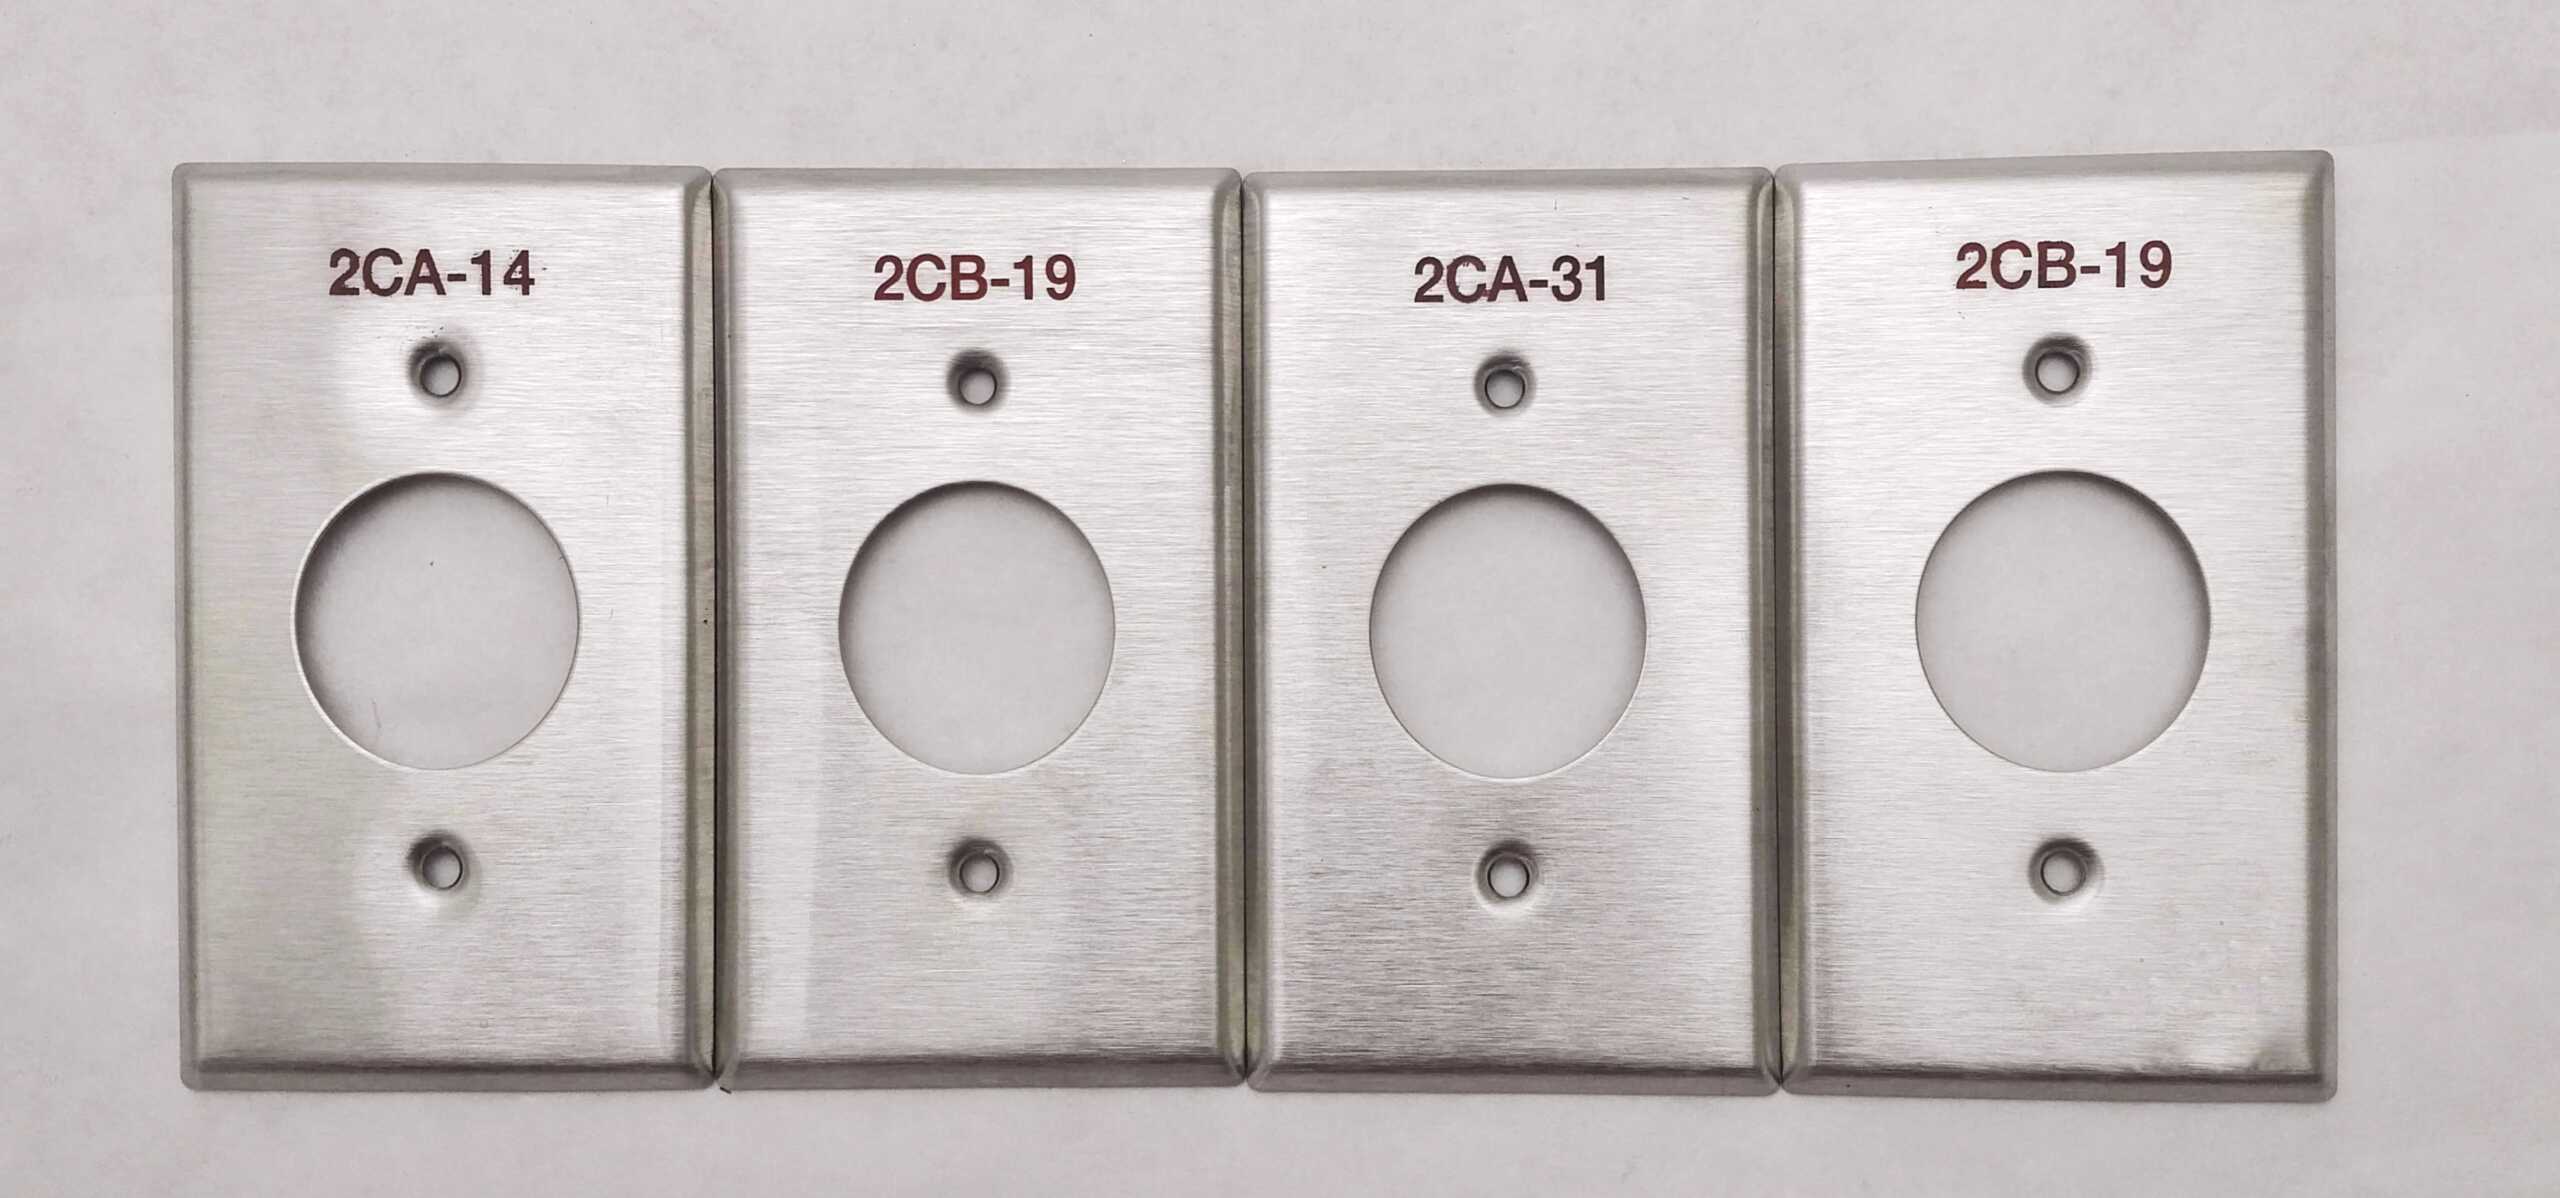 image of four custom engraved stainless steel paint-filled switch plate s with red paint-fill